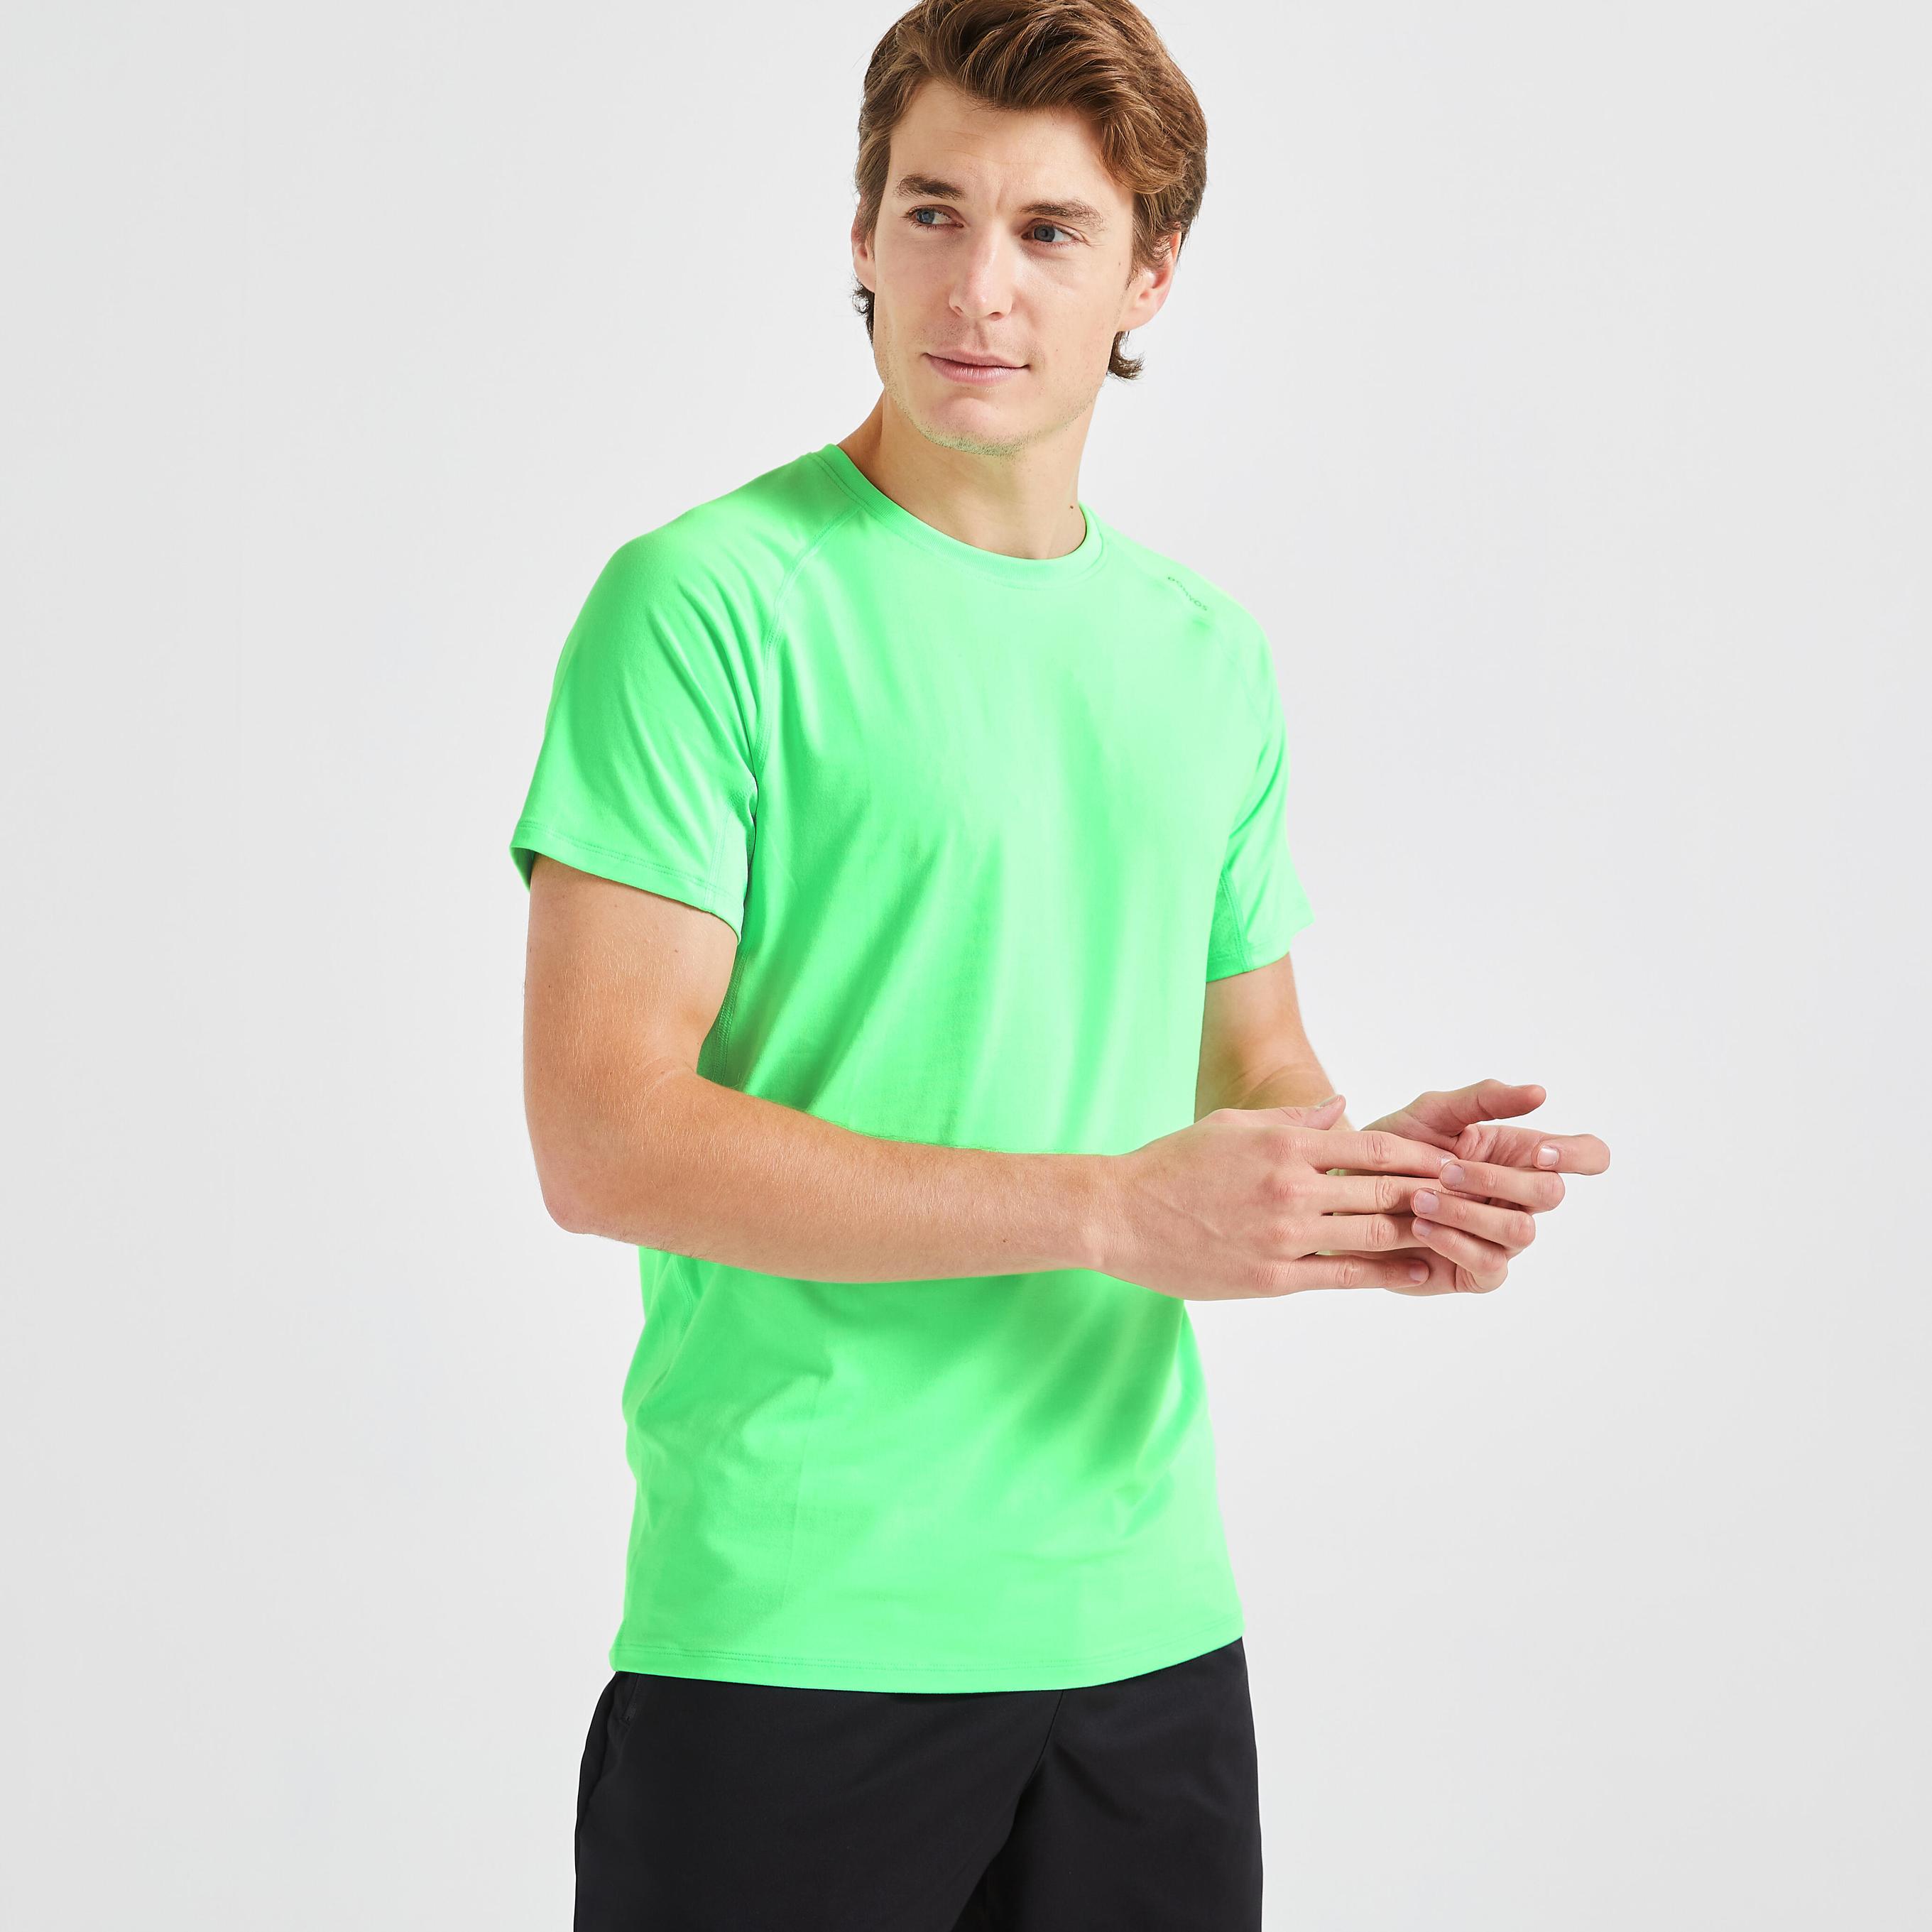 Men's Essential Fitness T-Shirt - Neon Green offers at S$ 7.9 in Decathlon